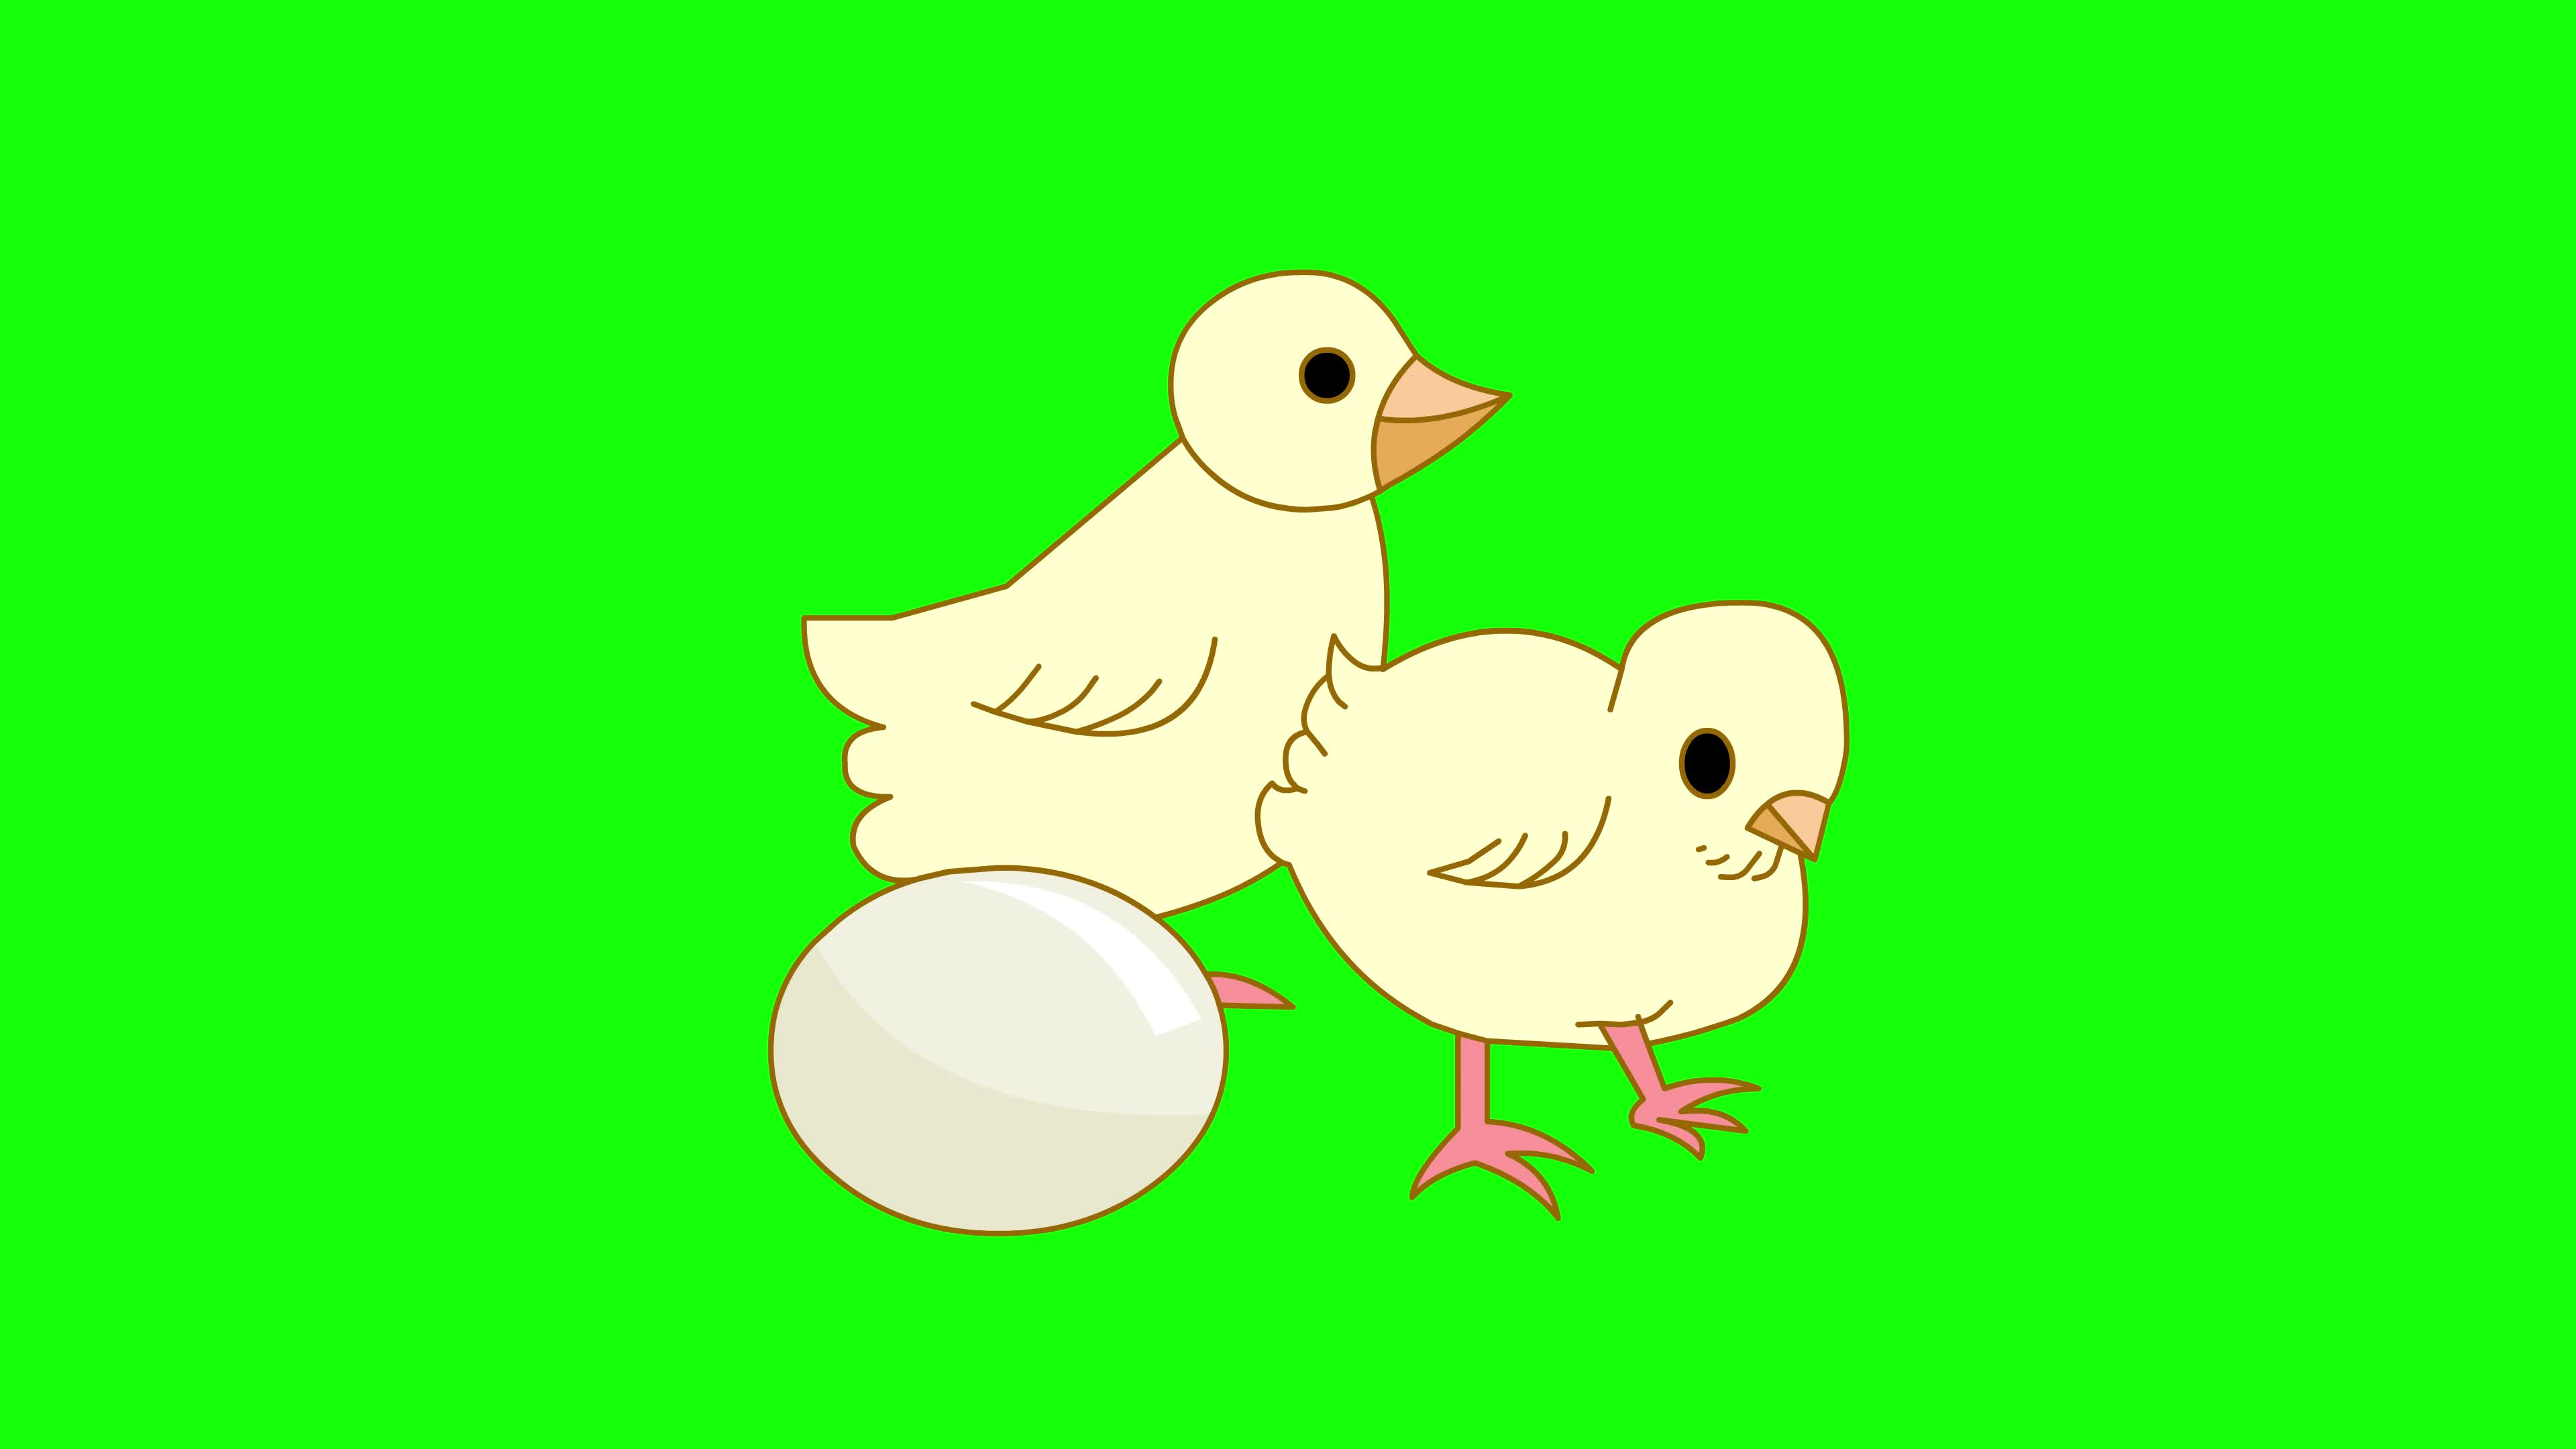 Egg Cartoon Stock Video Footage for Free Download